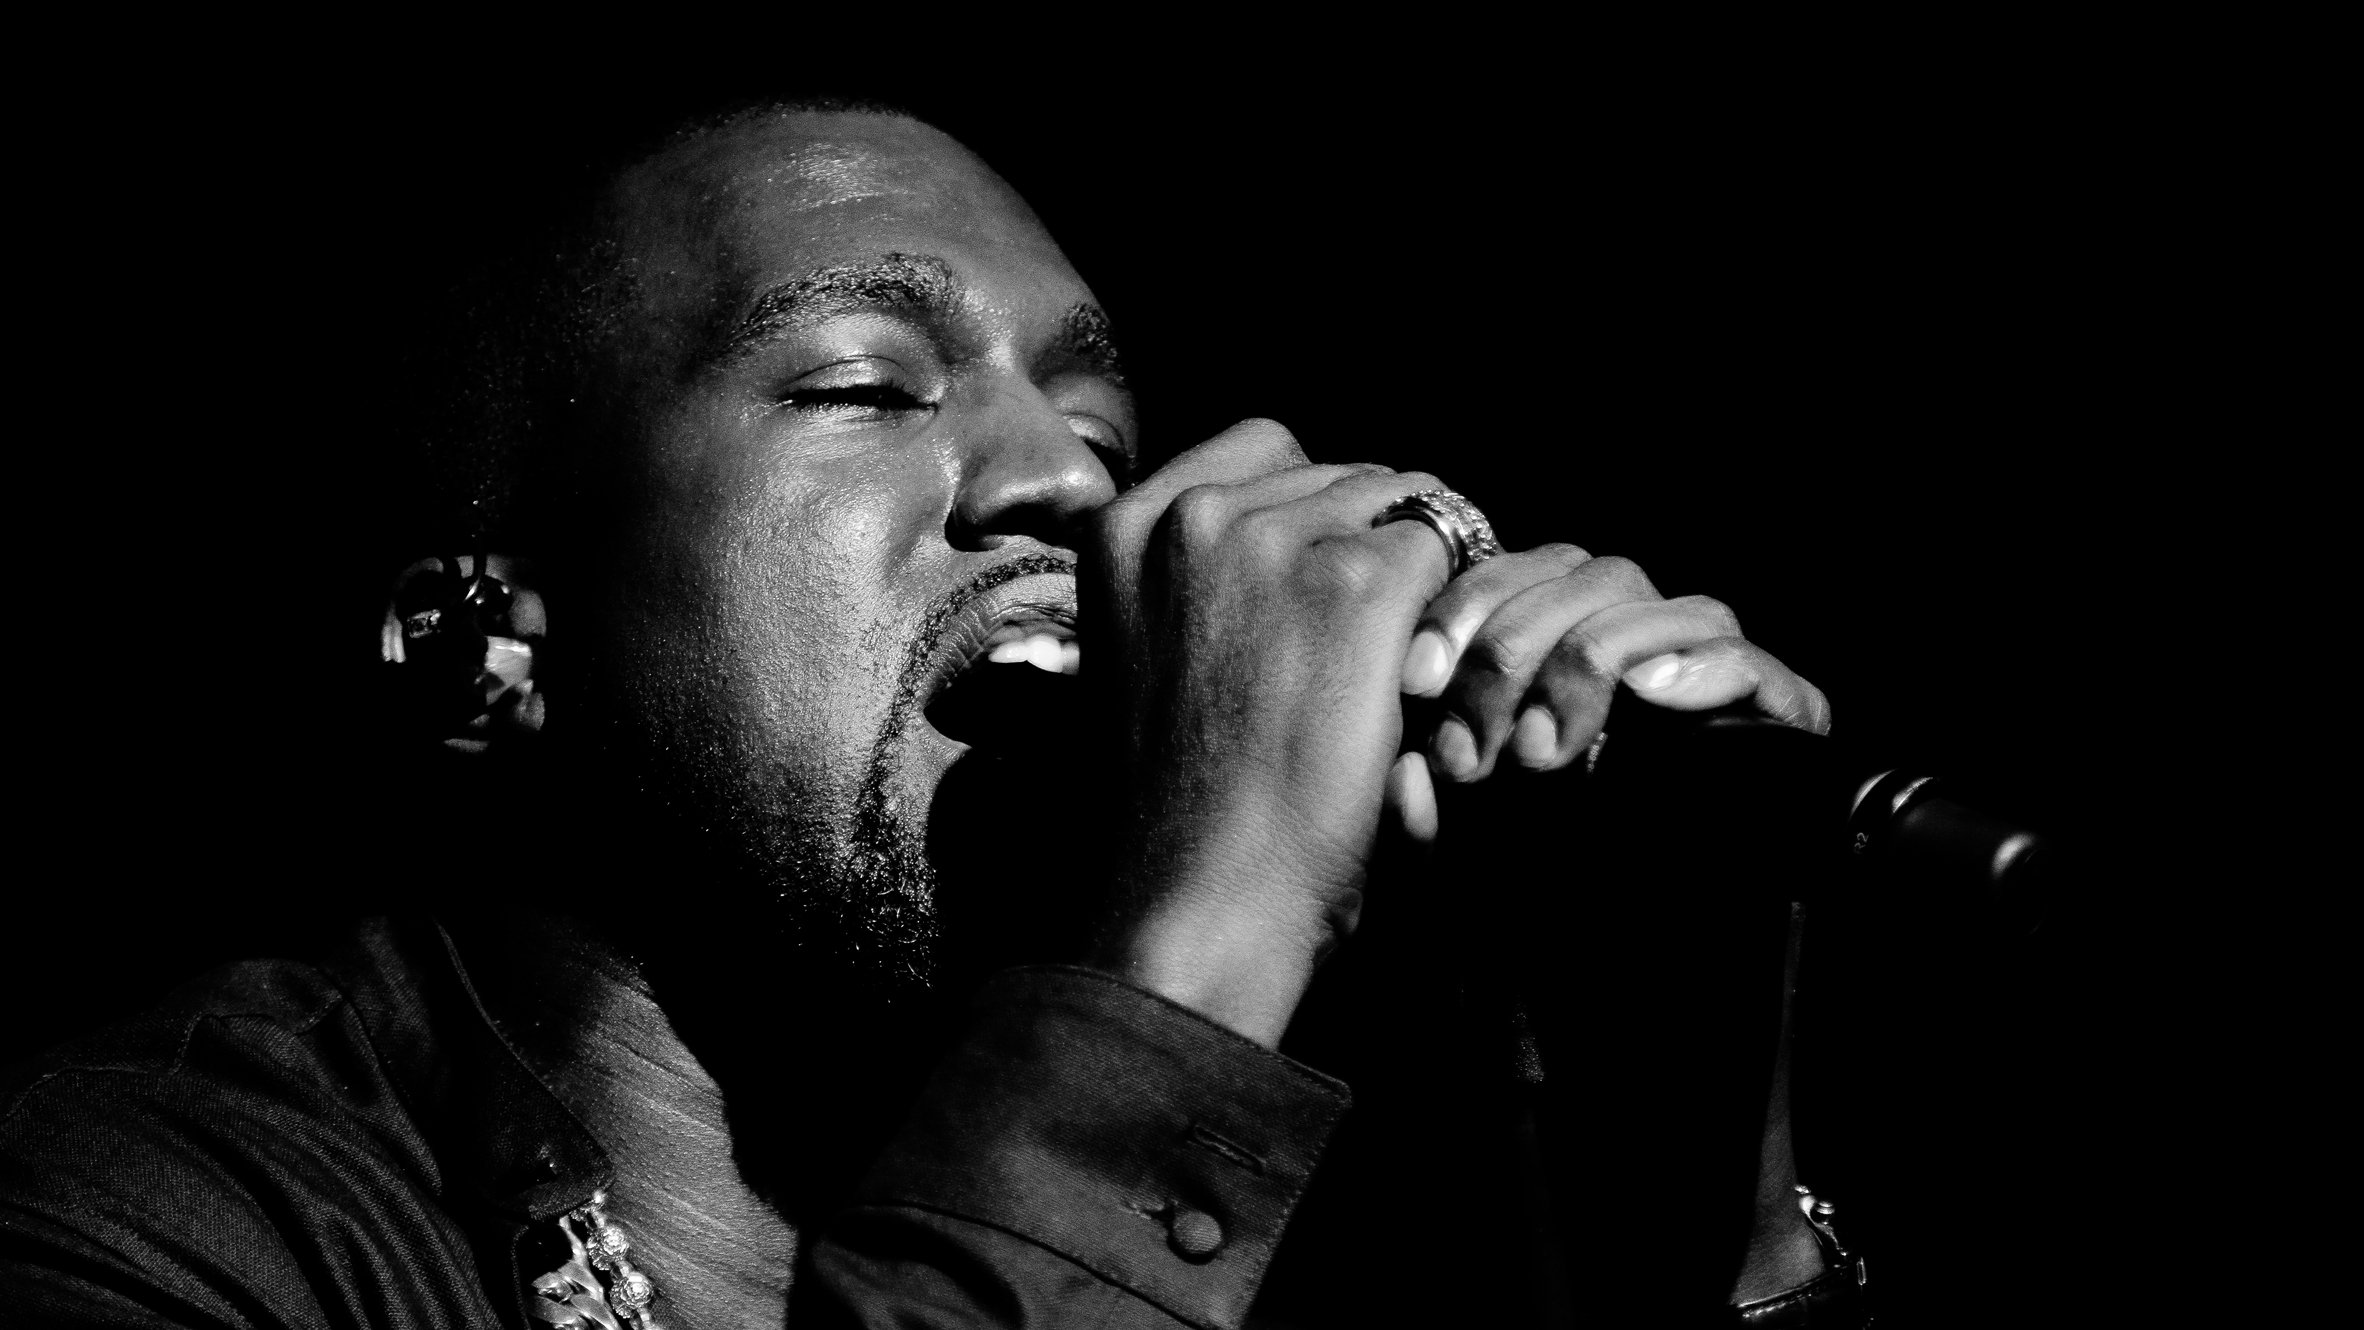 Watch this, this my City” - Kanye West at Sunday Service in